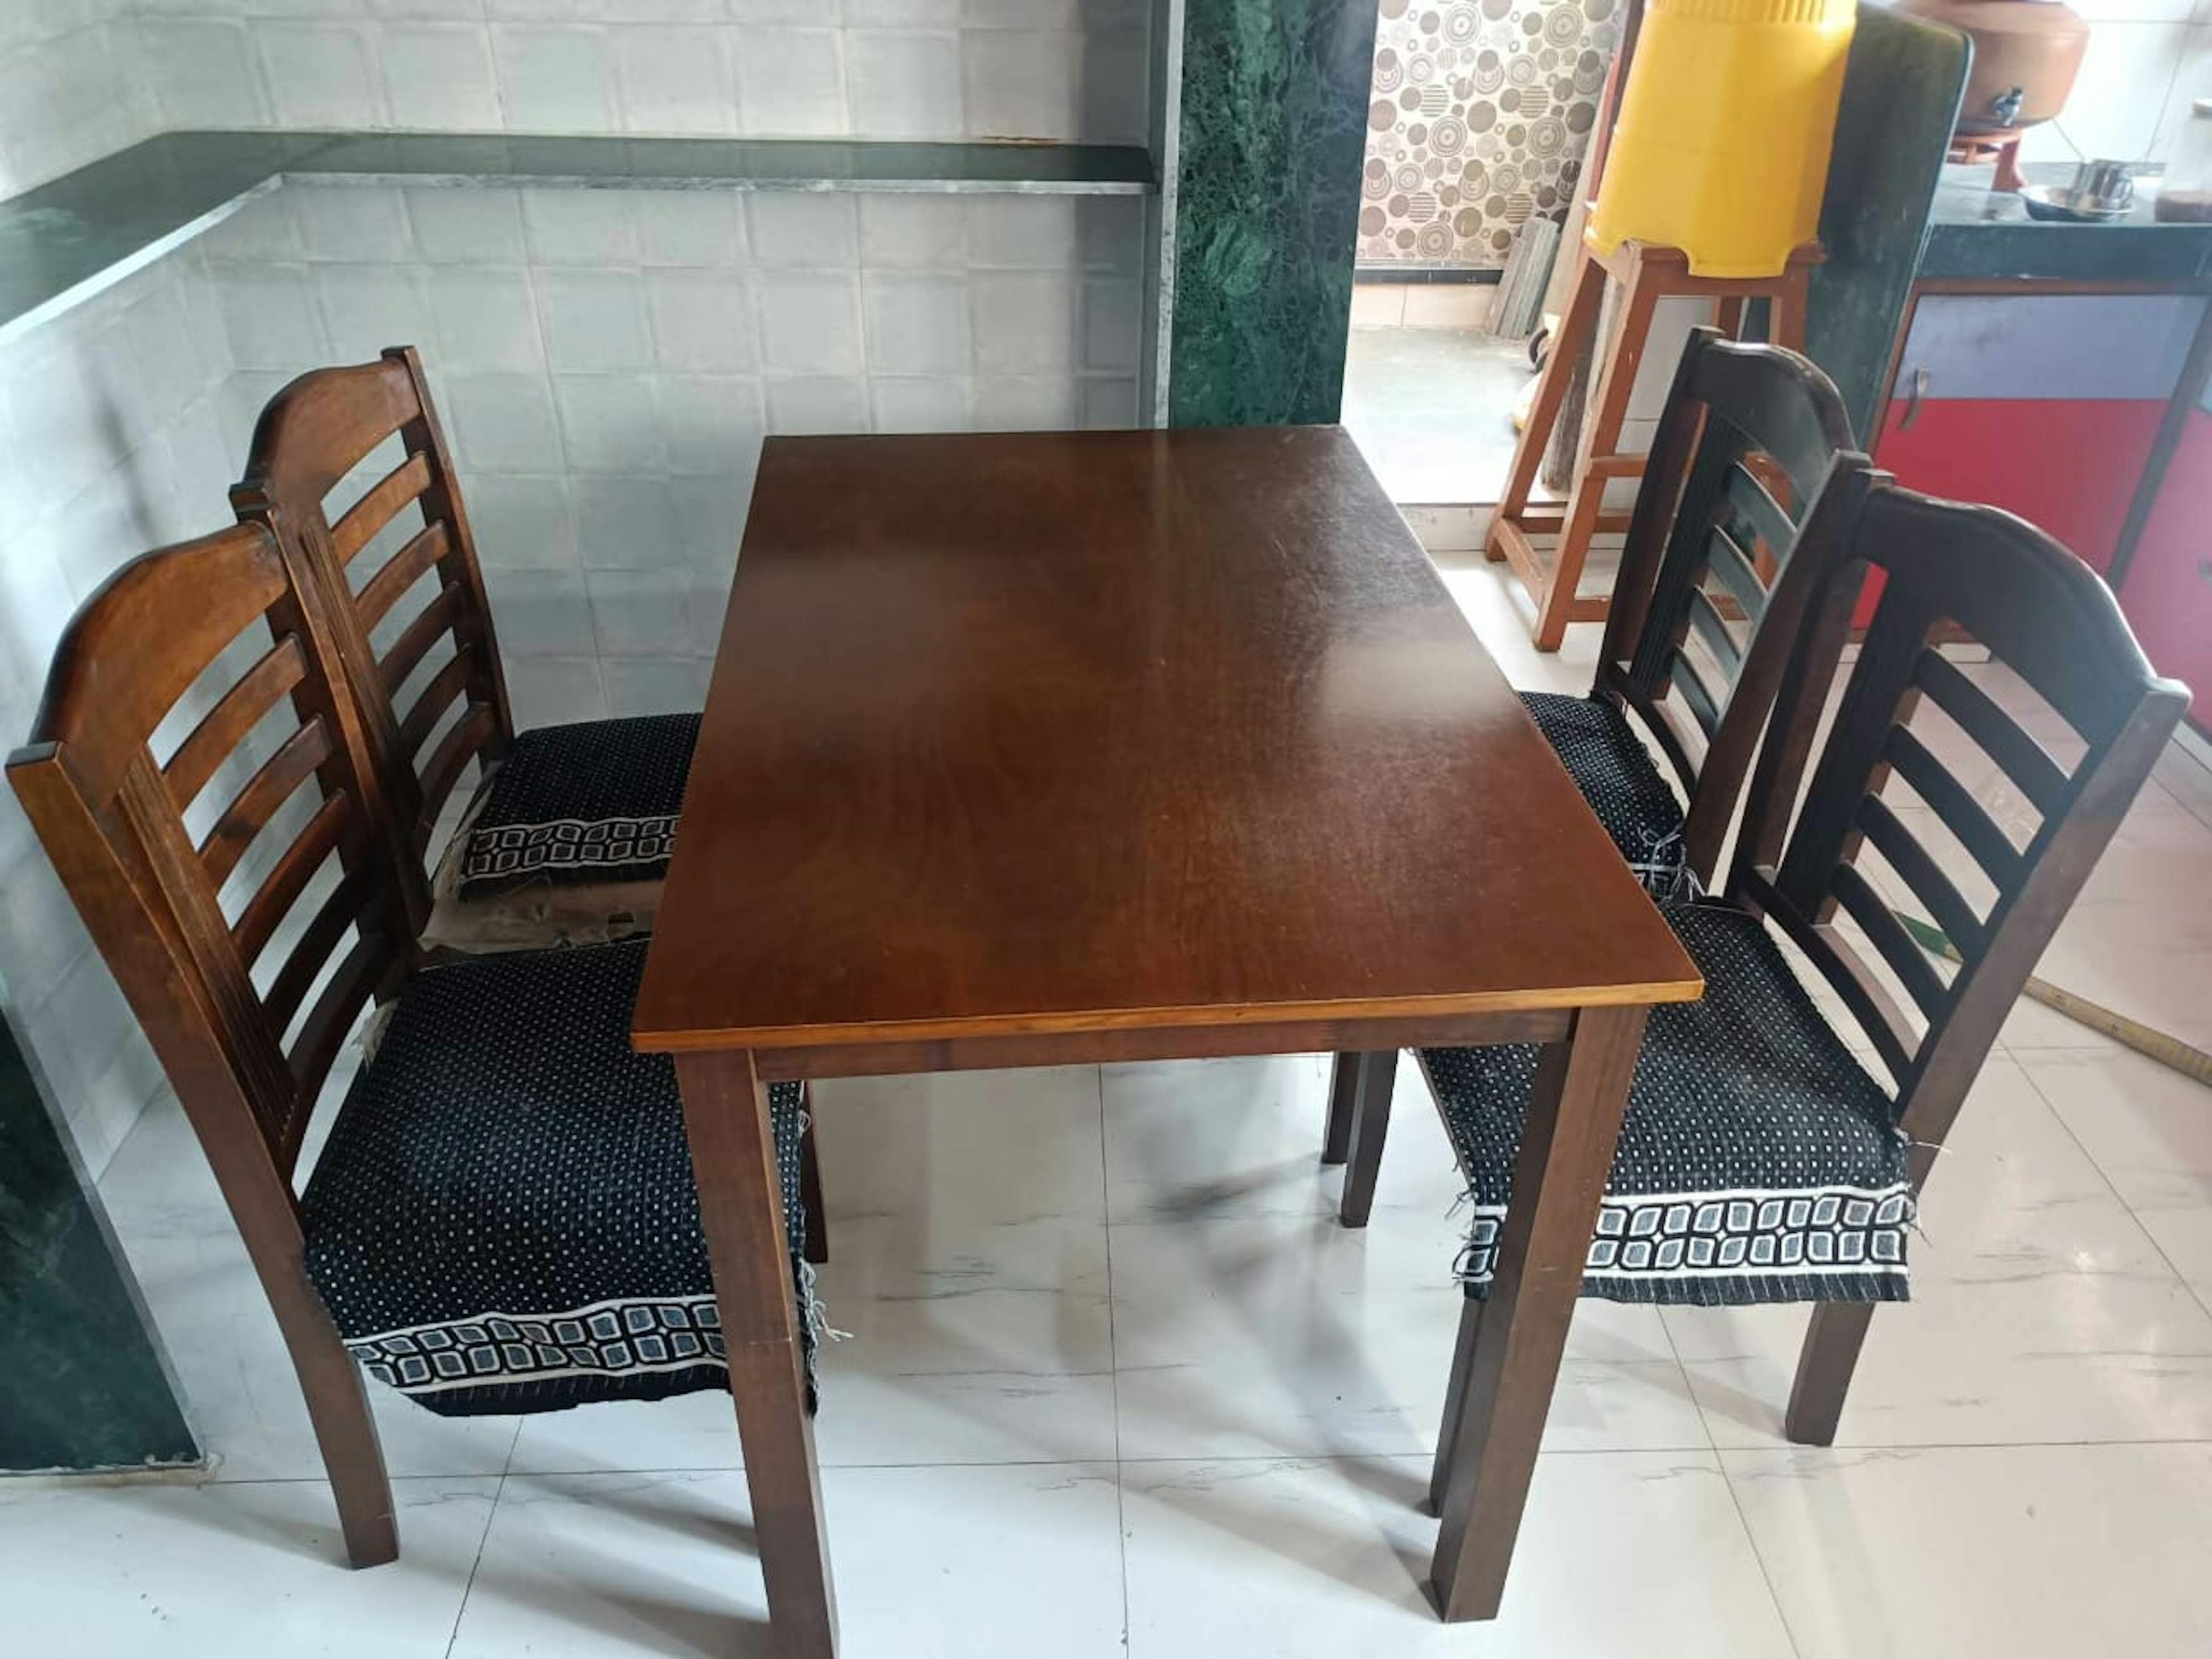 View - Dining Table photos, Dining Table available in Ahmedabad, make deal in 6500